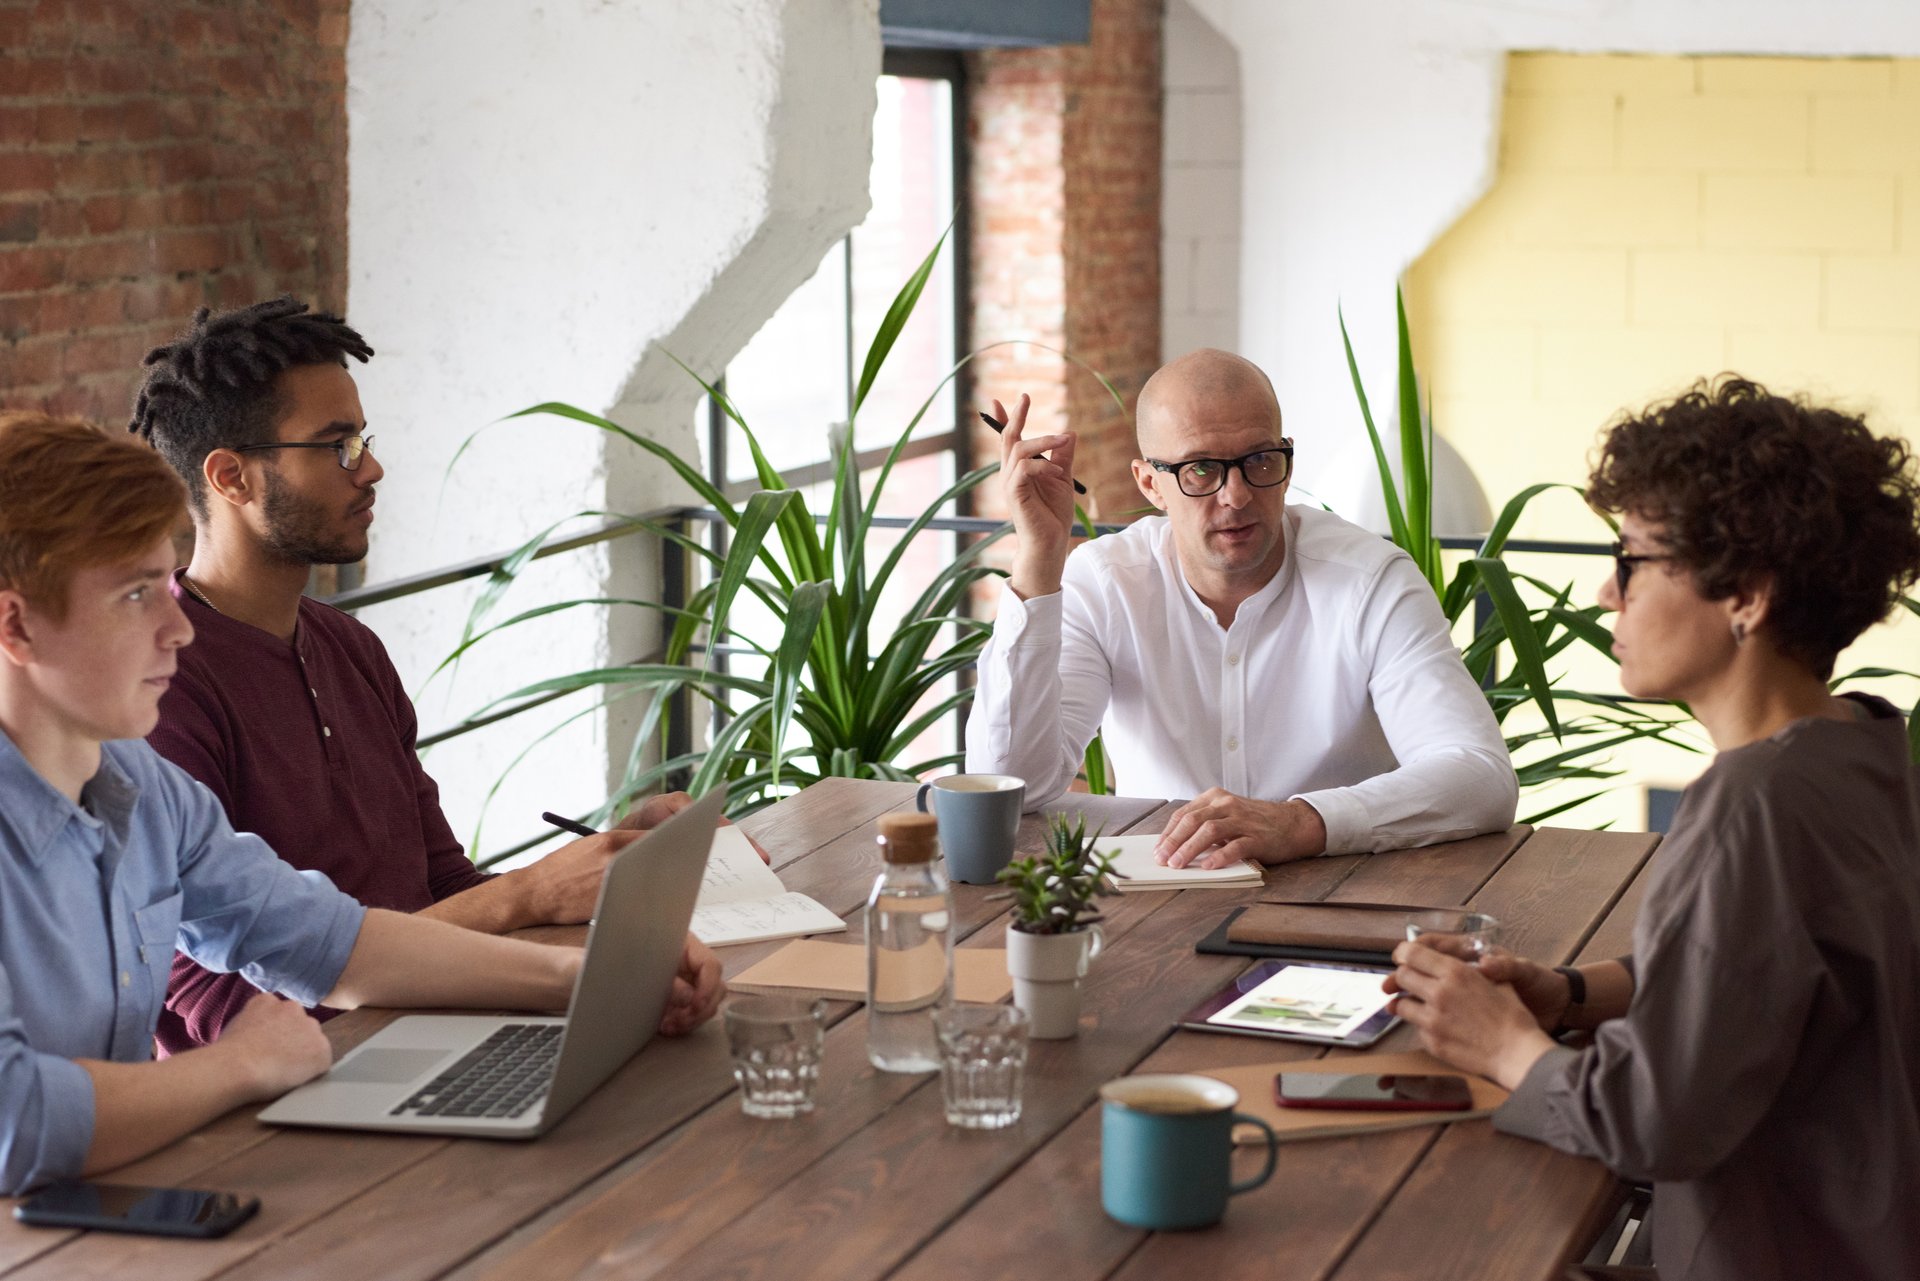 A group of four diverse individuals sit around a wooden table in a room with exposed brick walls and plants. They are engaged in a discussion, with one man gesturing with his hand. 